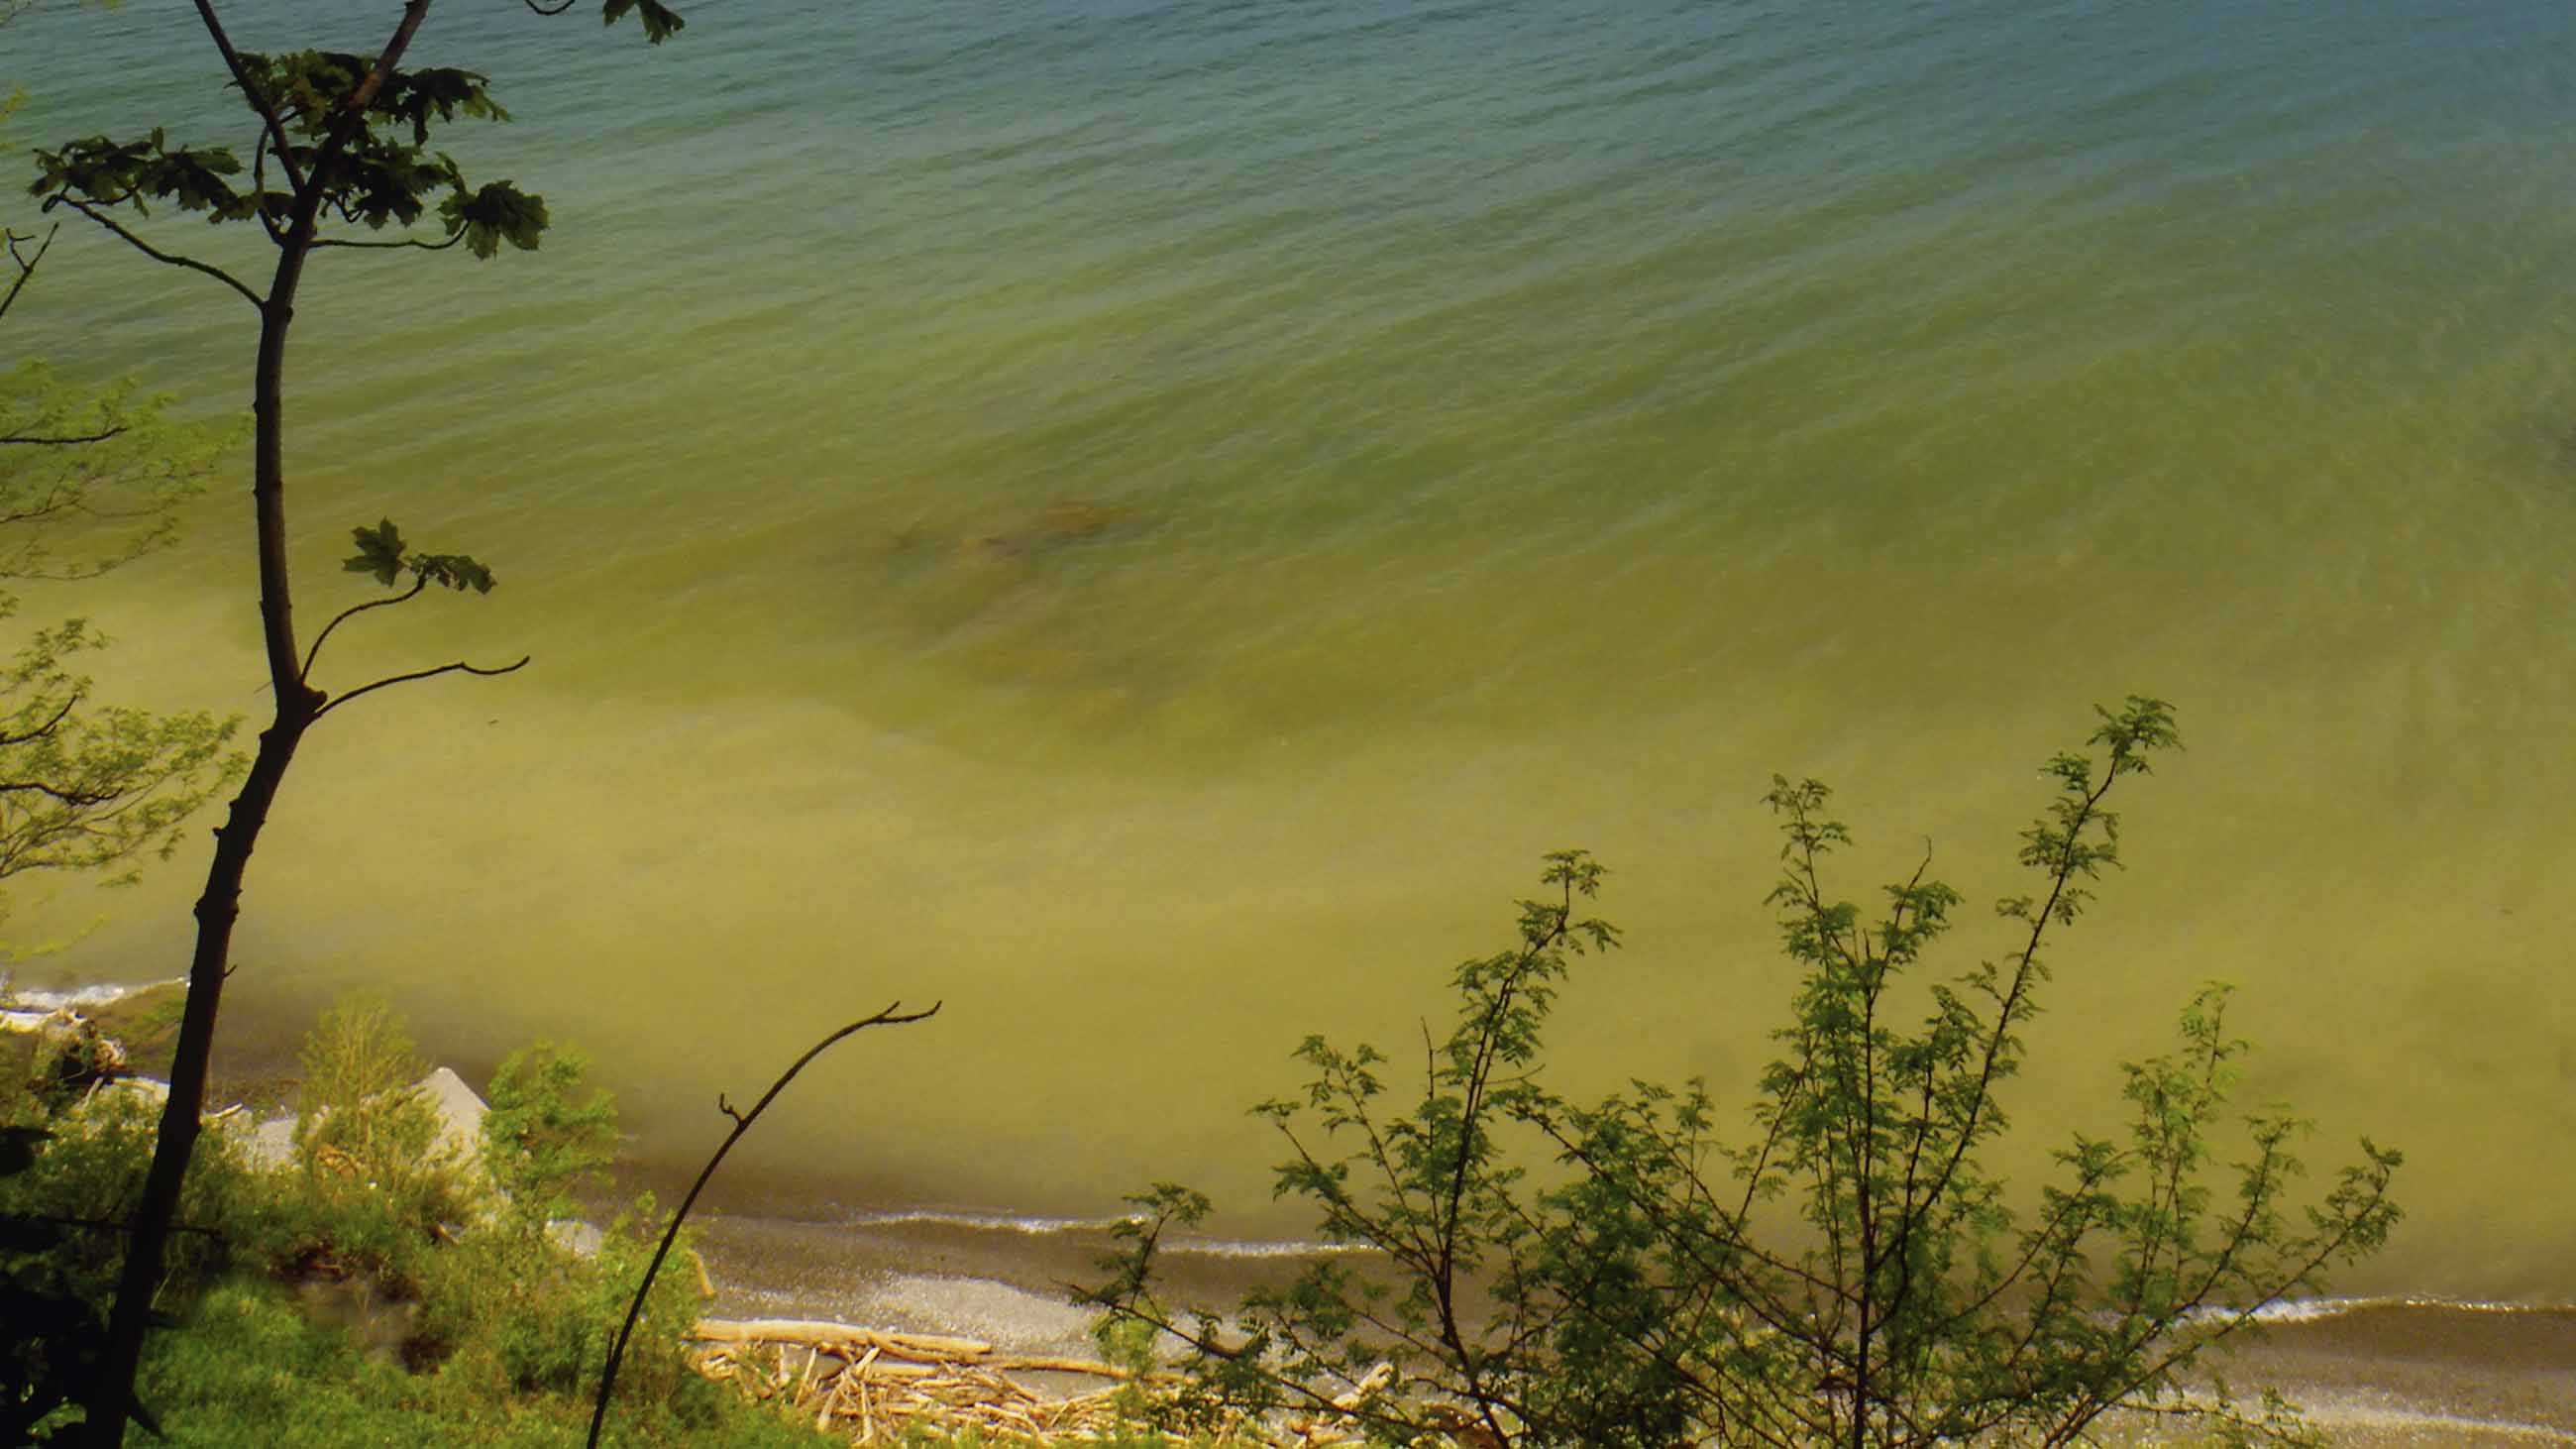 By the 1960s and 70s, nutrient runoff in the shallow waters of Lake Erie's Western Basin led to a cascade of environmental problems. Infamously, Lake Erie was declared dead in the newspapers and in Congressional testimony.